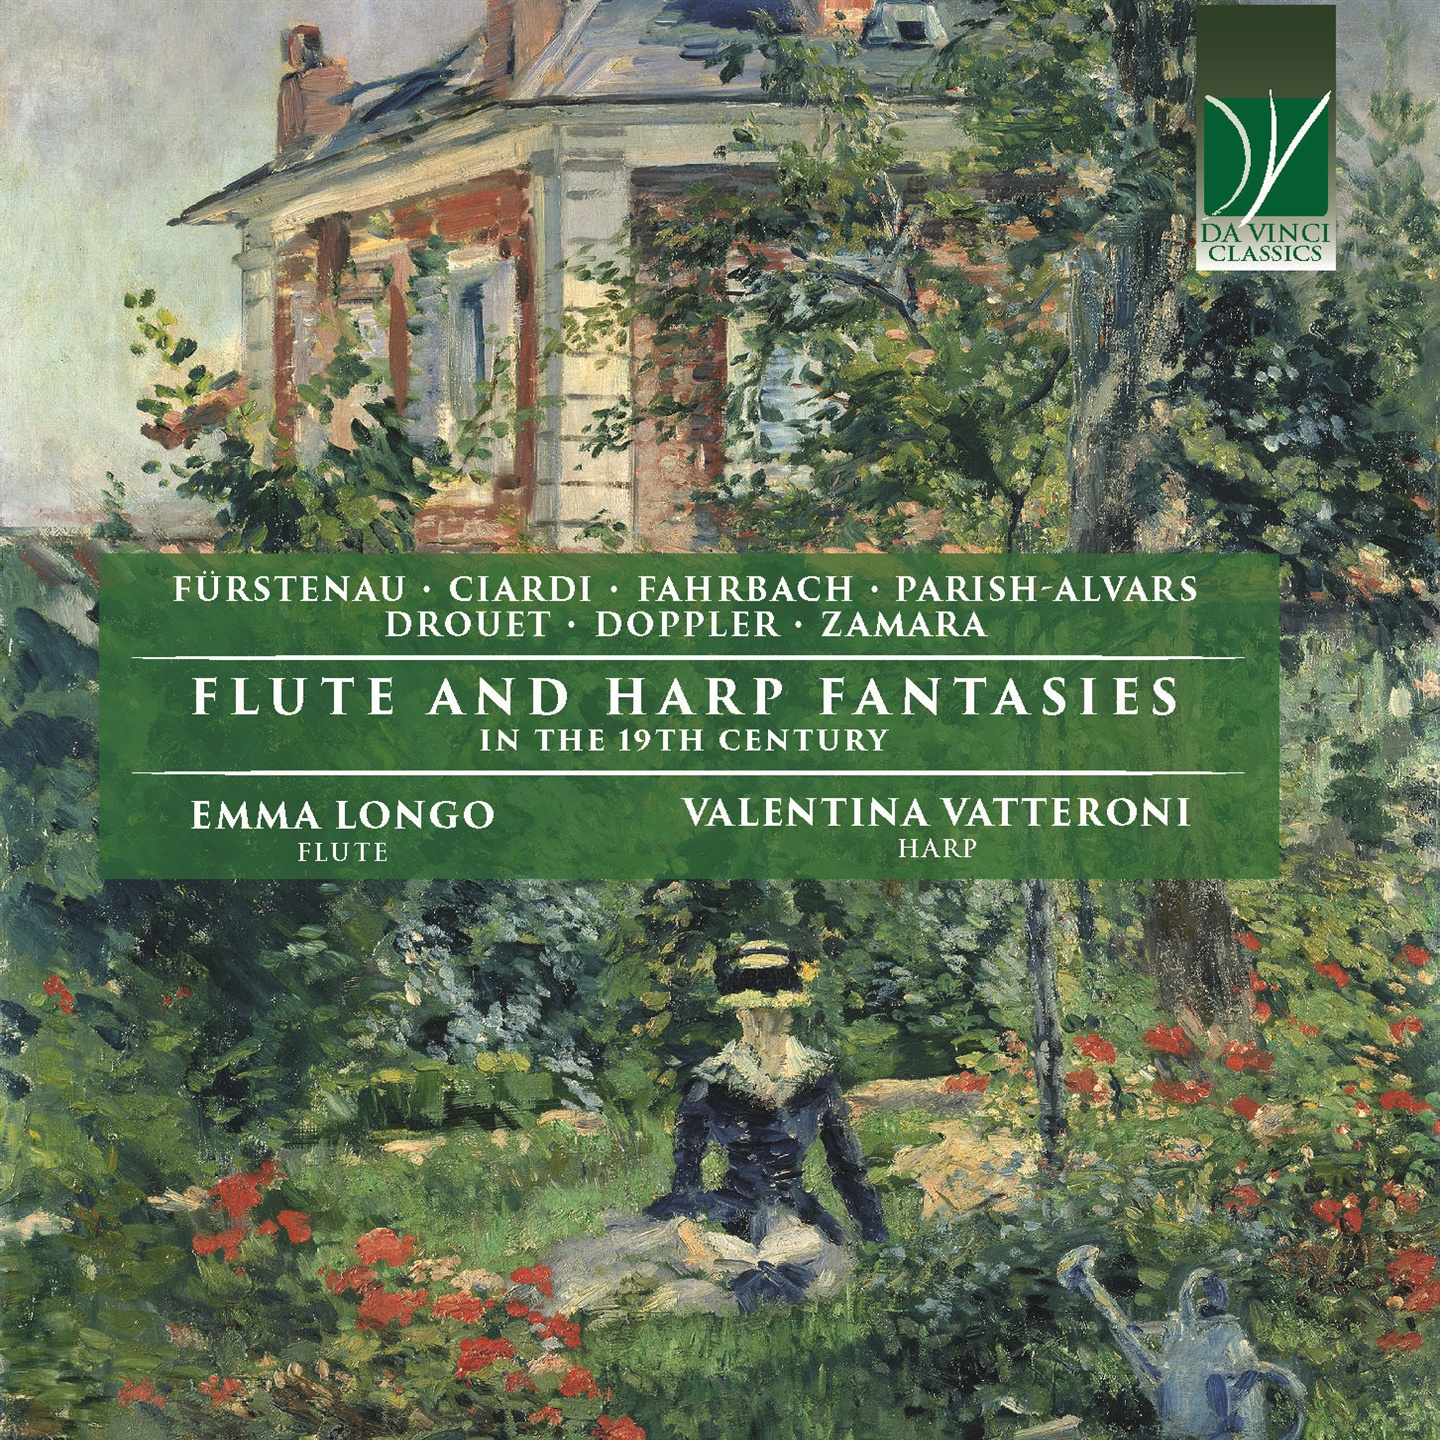 FLUTE AND HARP FANTASIES IN THE 19TH CENTURY